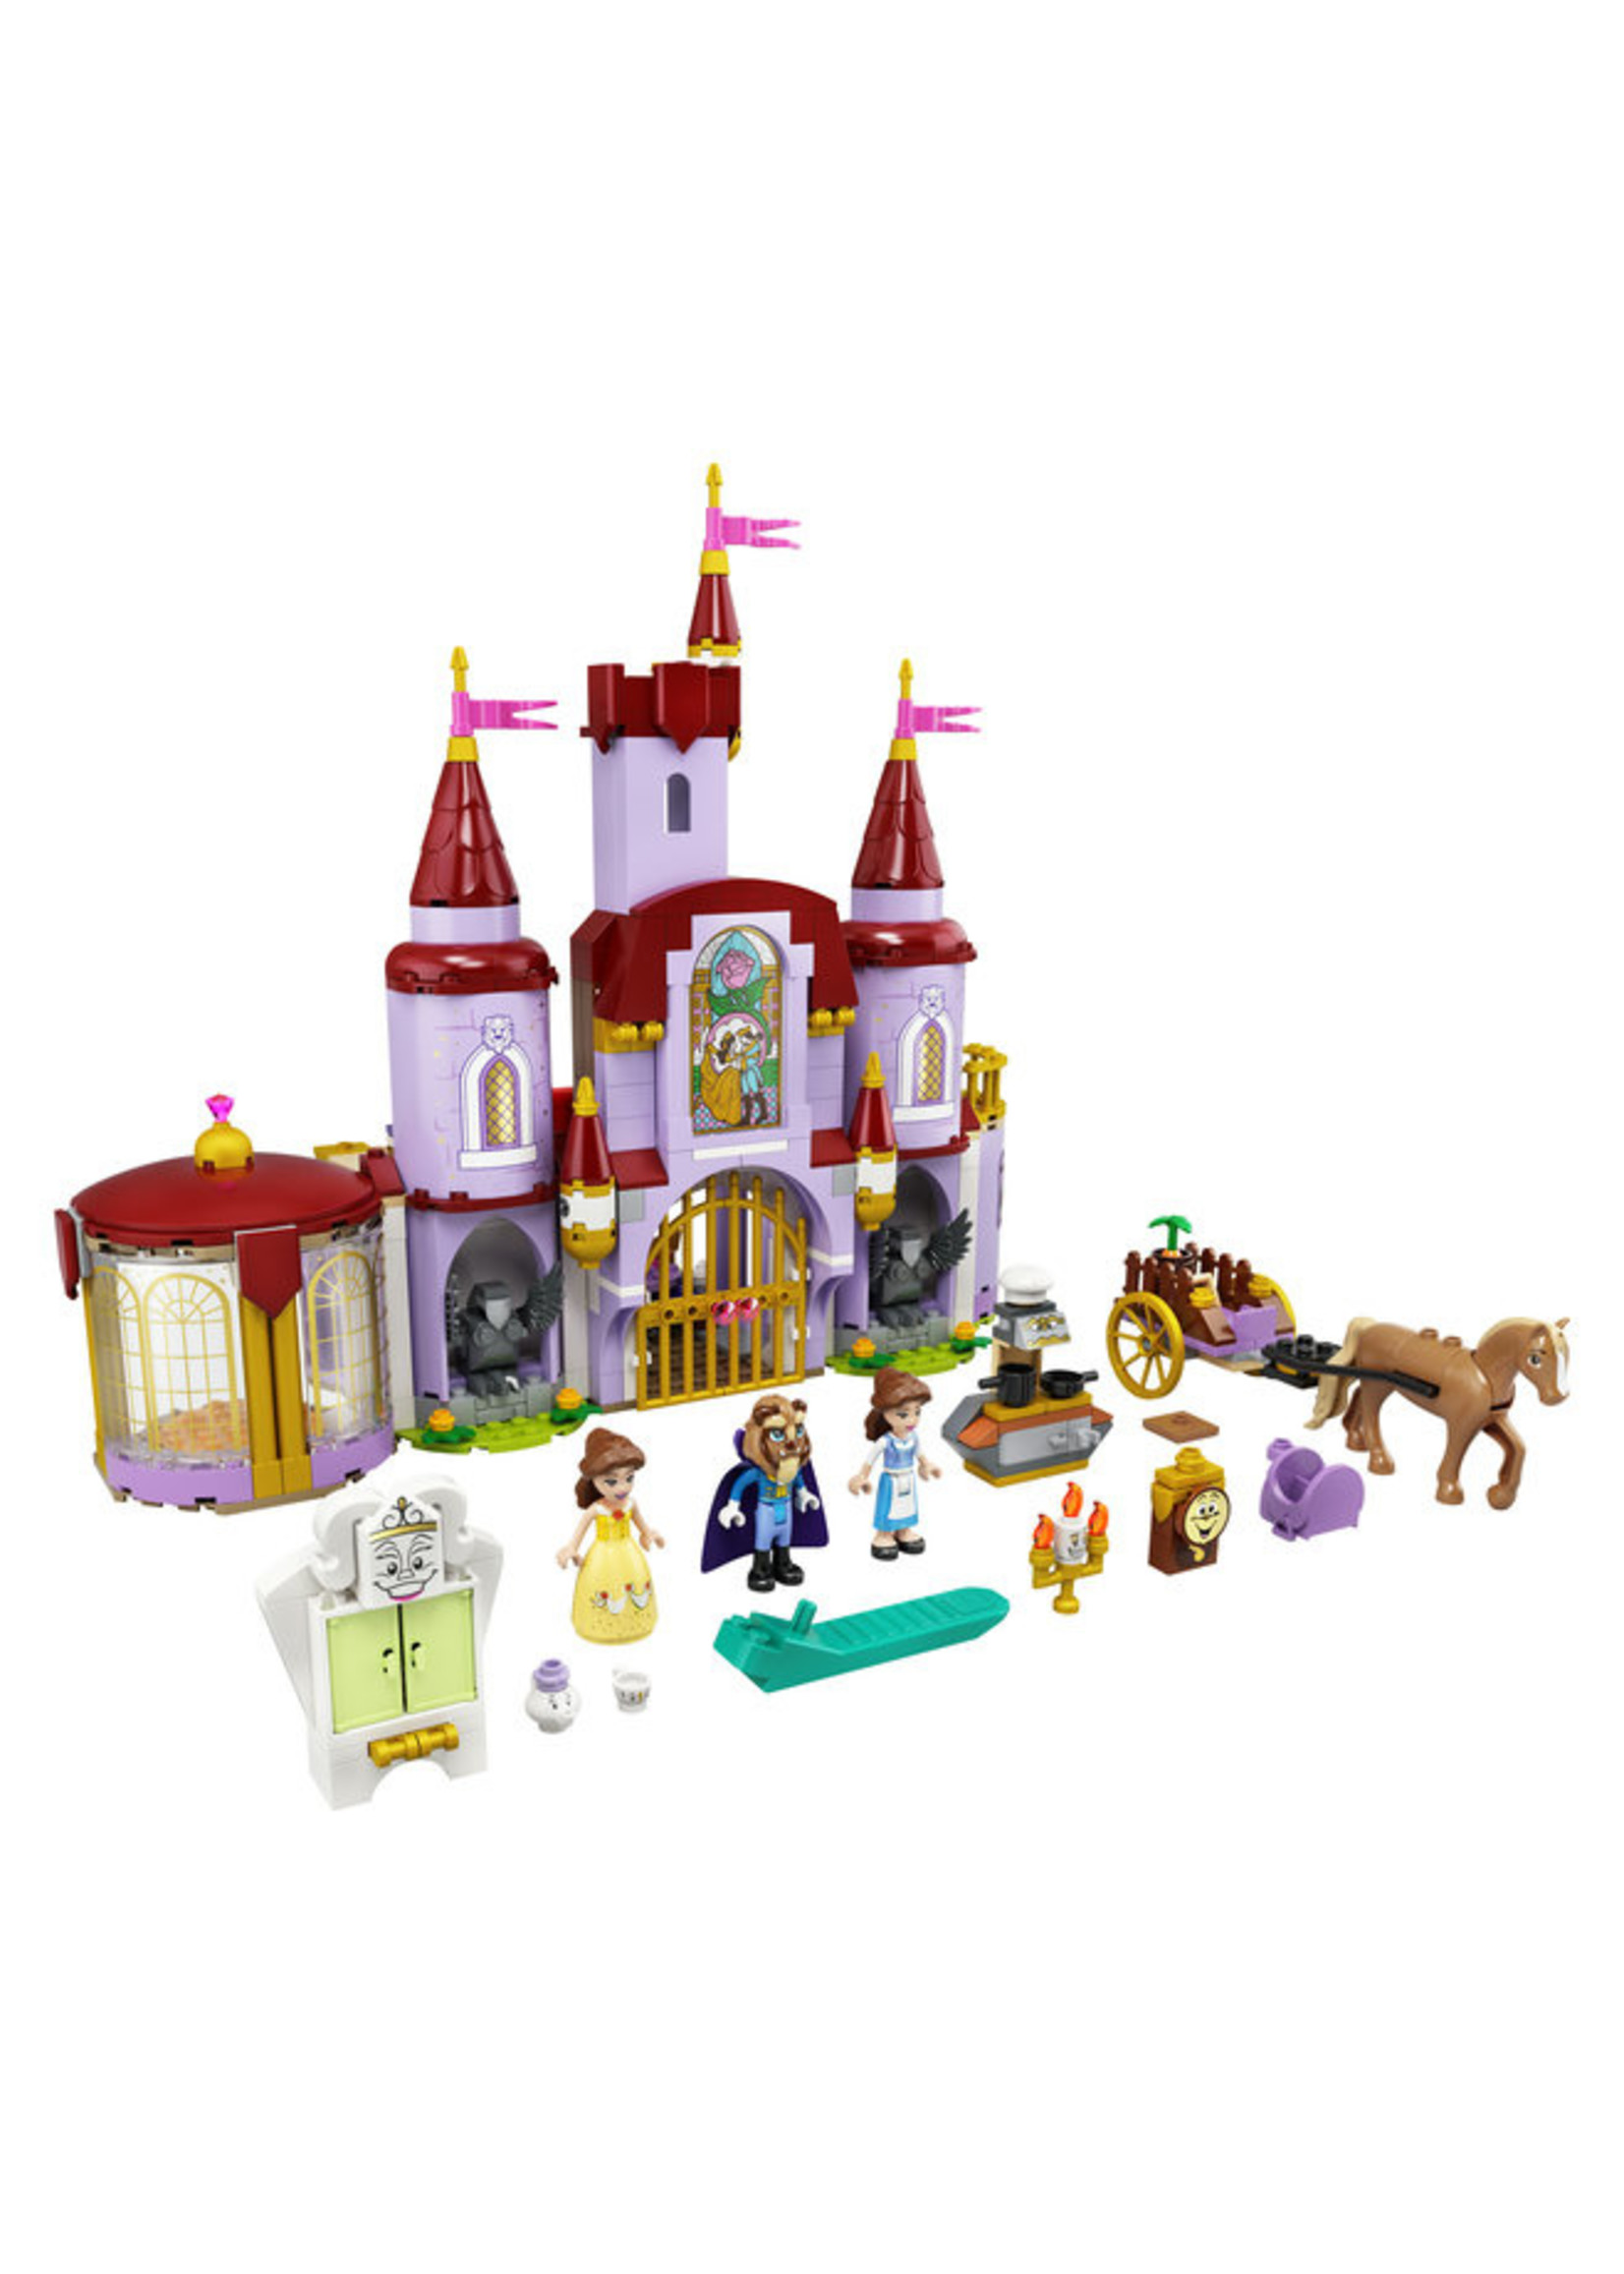 LEGO 43196 - Belle and The Beast's Castle